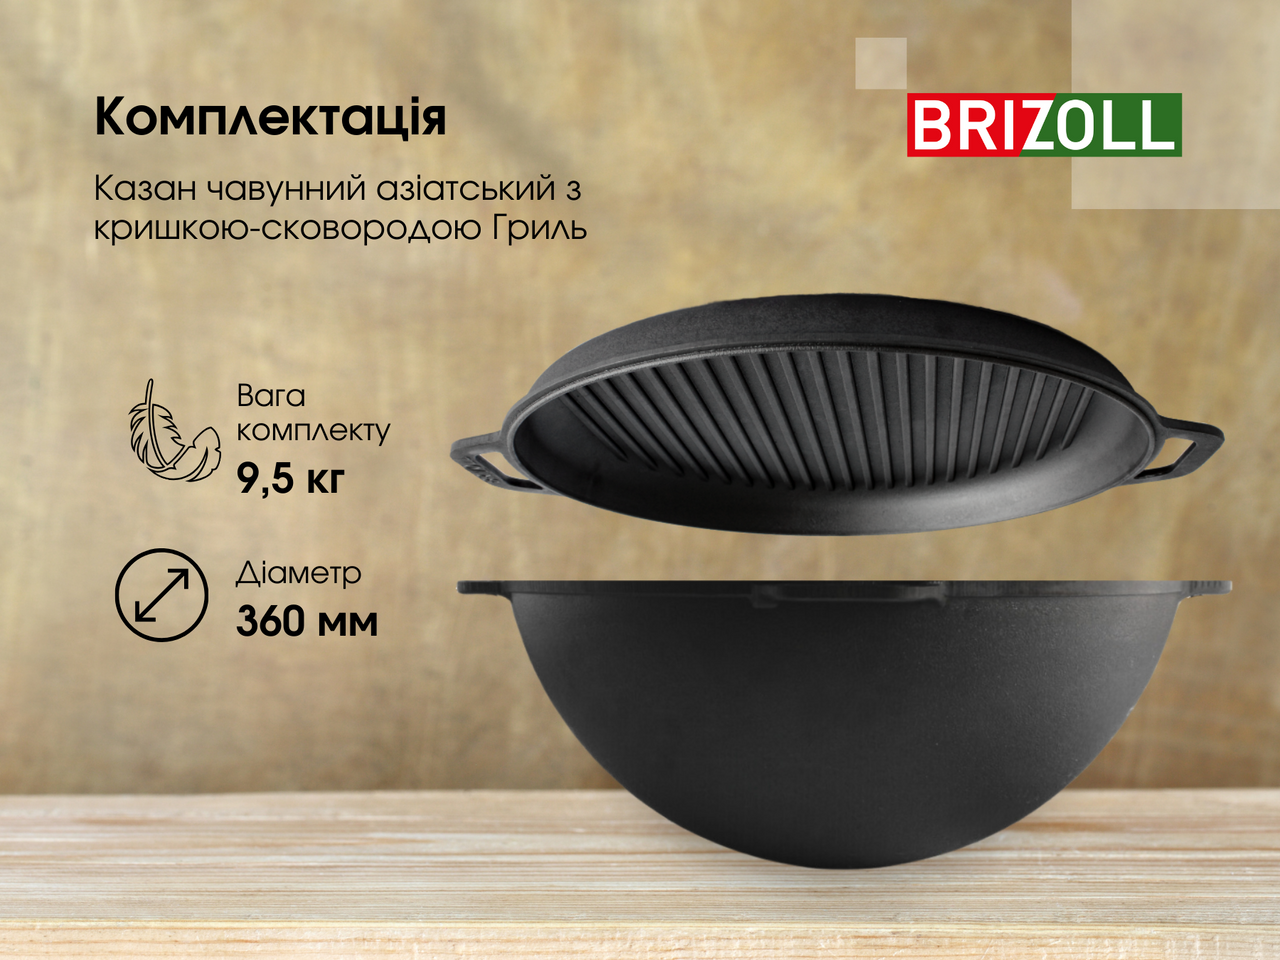 Cast iron asian cauldron WITH A GRILL LID-FRYING PAN 8 L